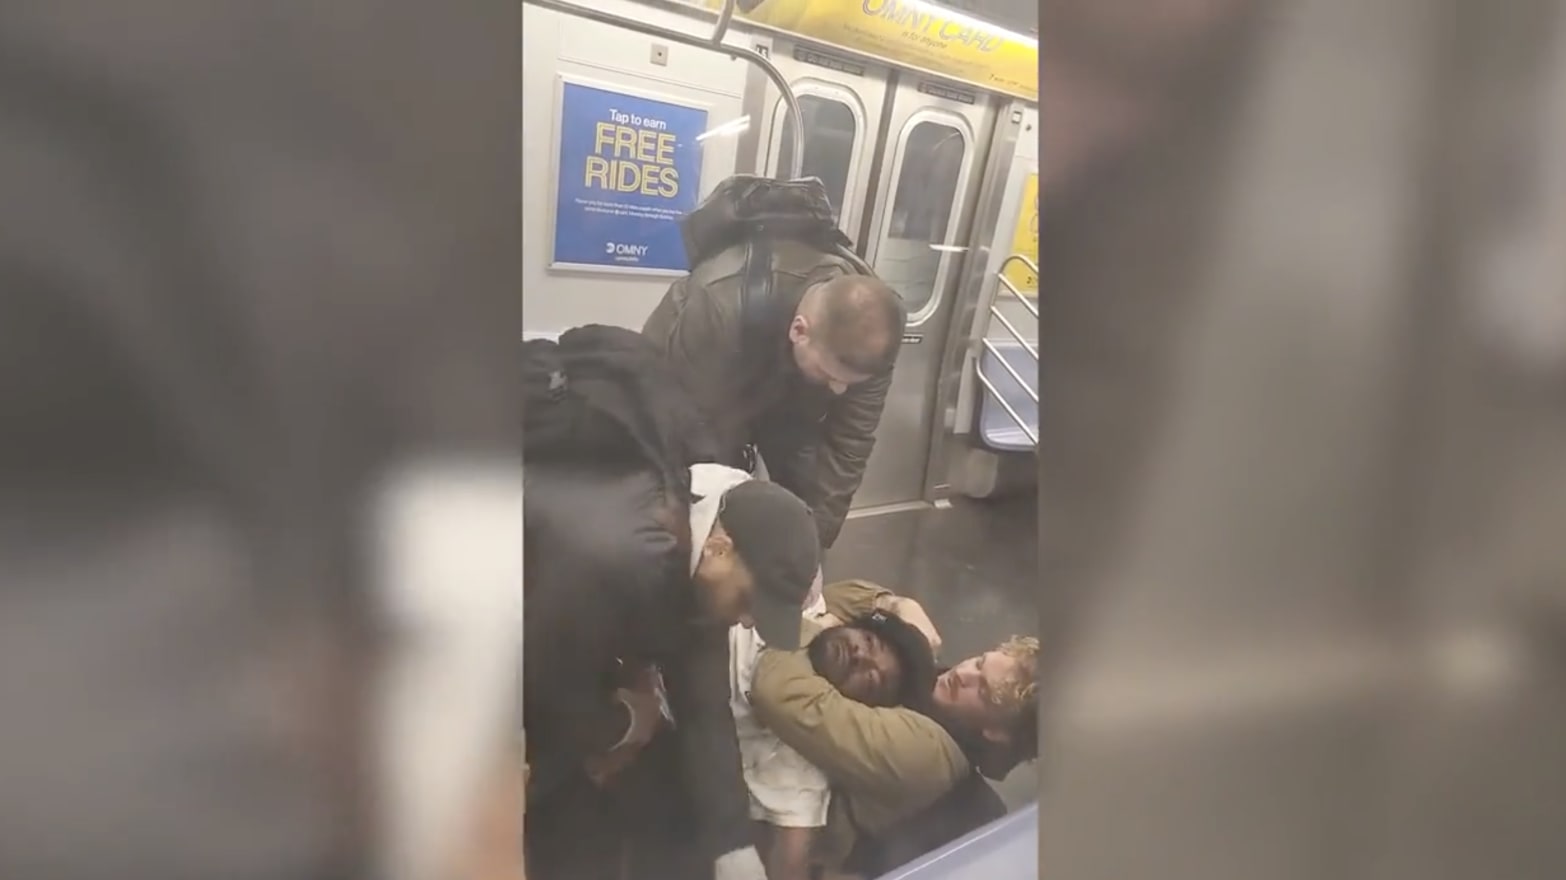 A passenger puts a homeless man in a deadly chokehold on the New York subway.